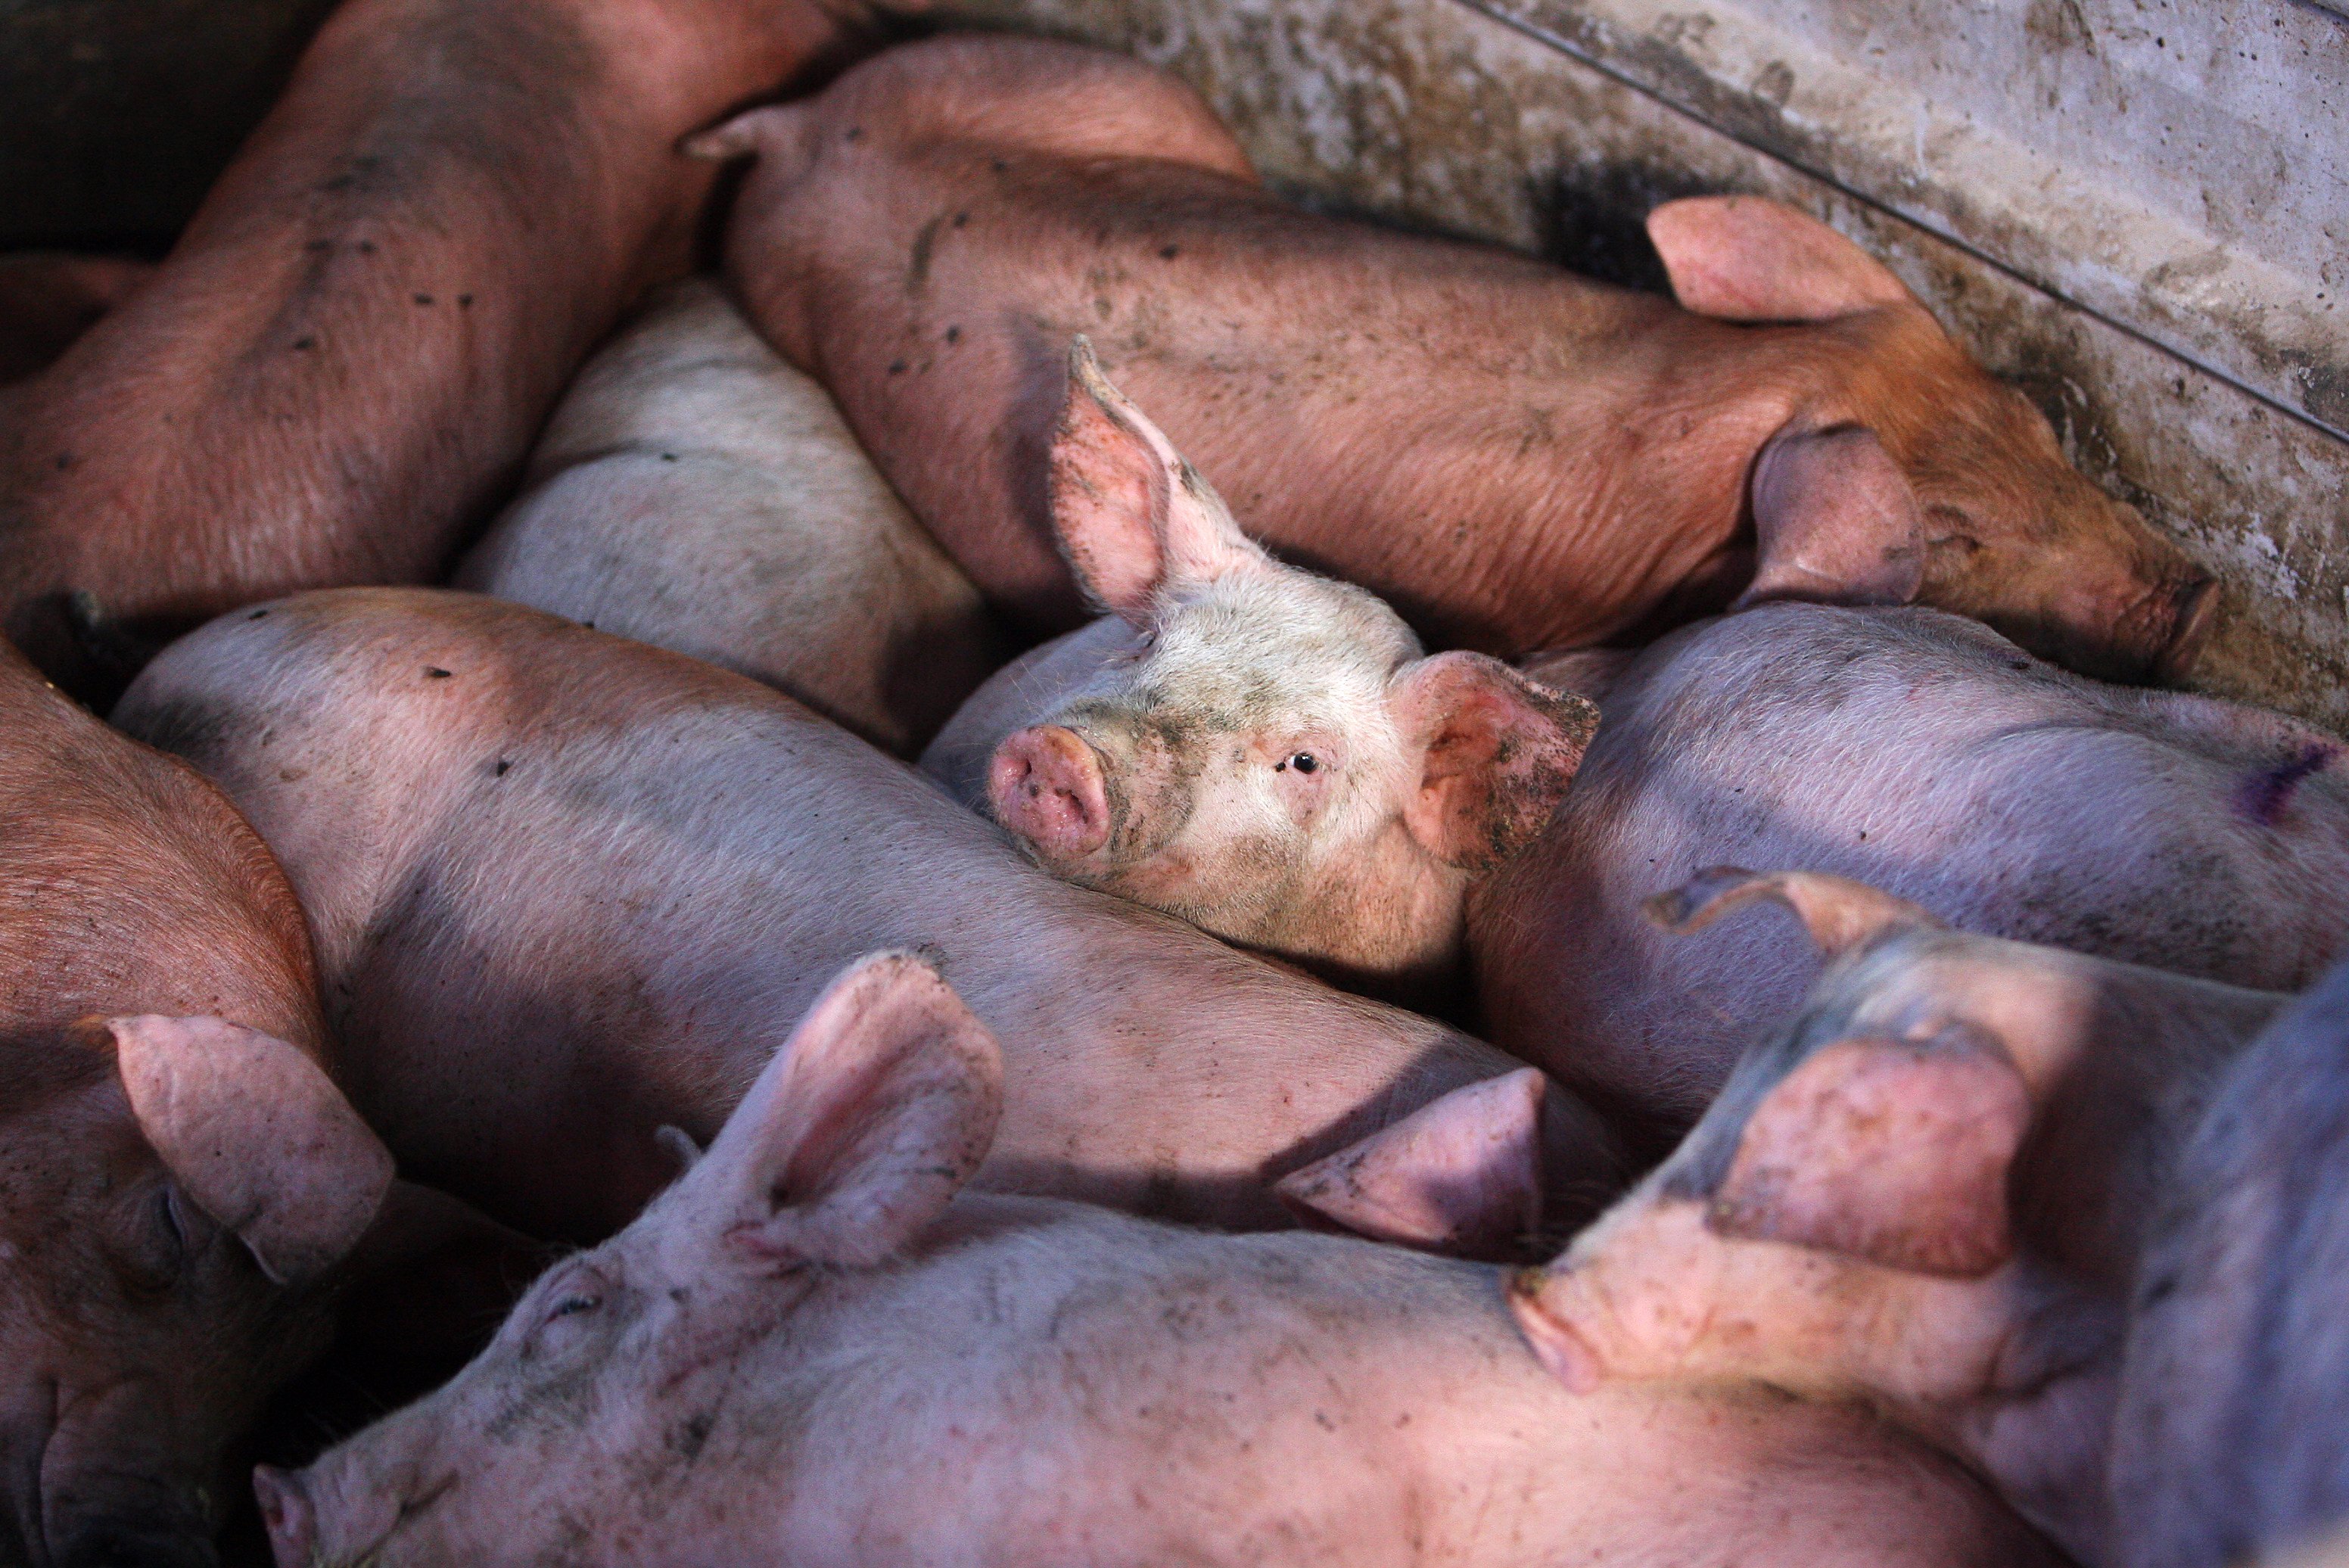 Hong Kong authorities to slaughter 32 pigs over African swine fever outbreak. Photo: SCMP